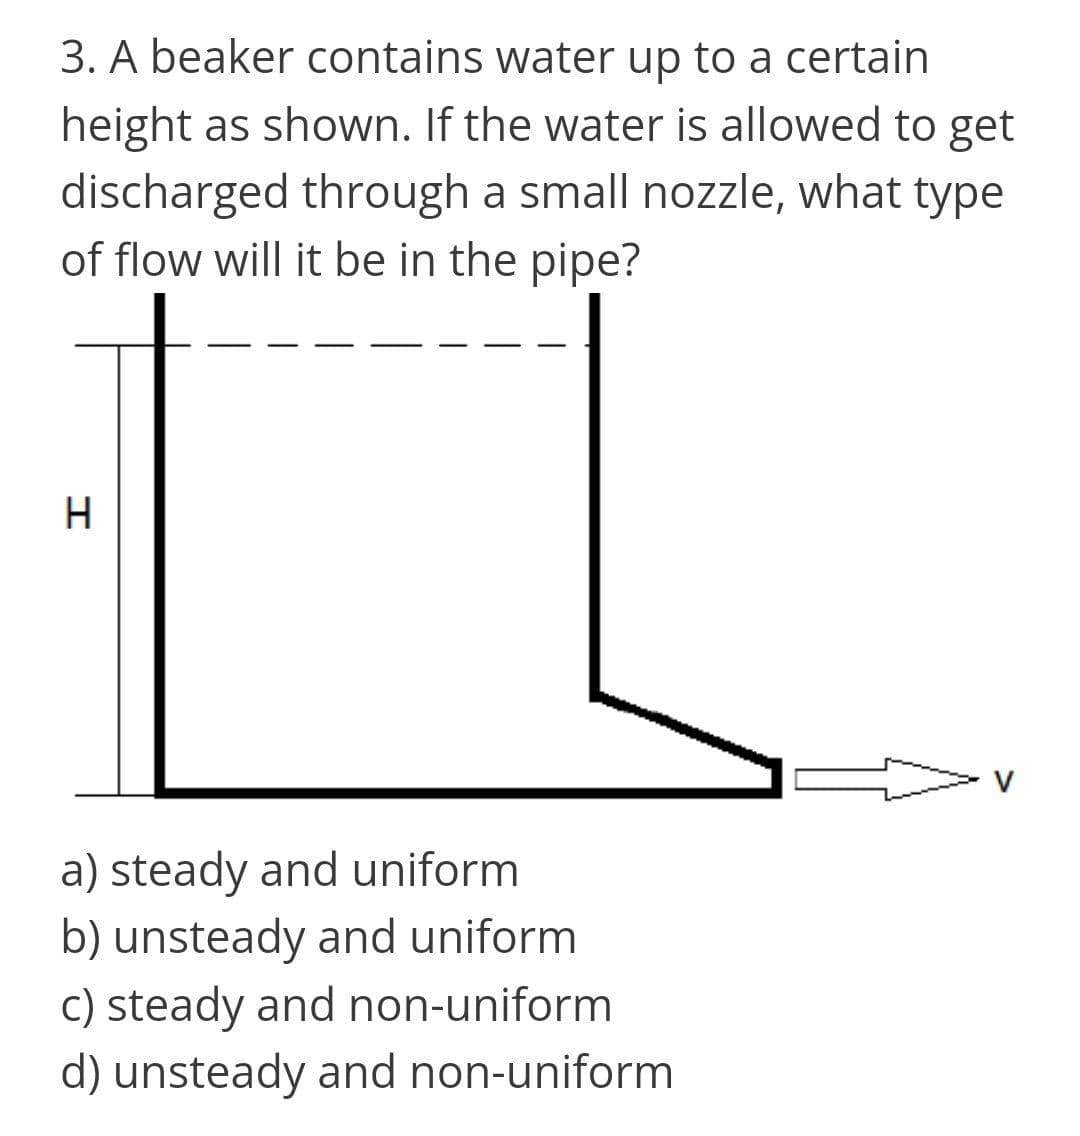 3. A beaker contains water up to a certain
height as shown. If the water is allowed to get
discharged through a small nozzle, what type
of flow will it be in the pipe?
H
V
a) steady and uniform
b) unsteady and uniform
c) steady and non-uniform
d) unsteady and non-uniform
